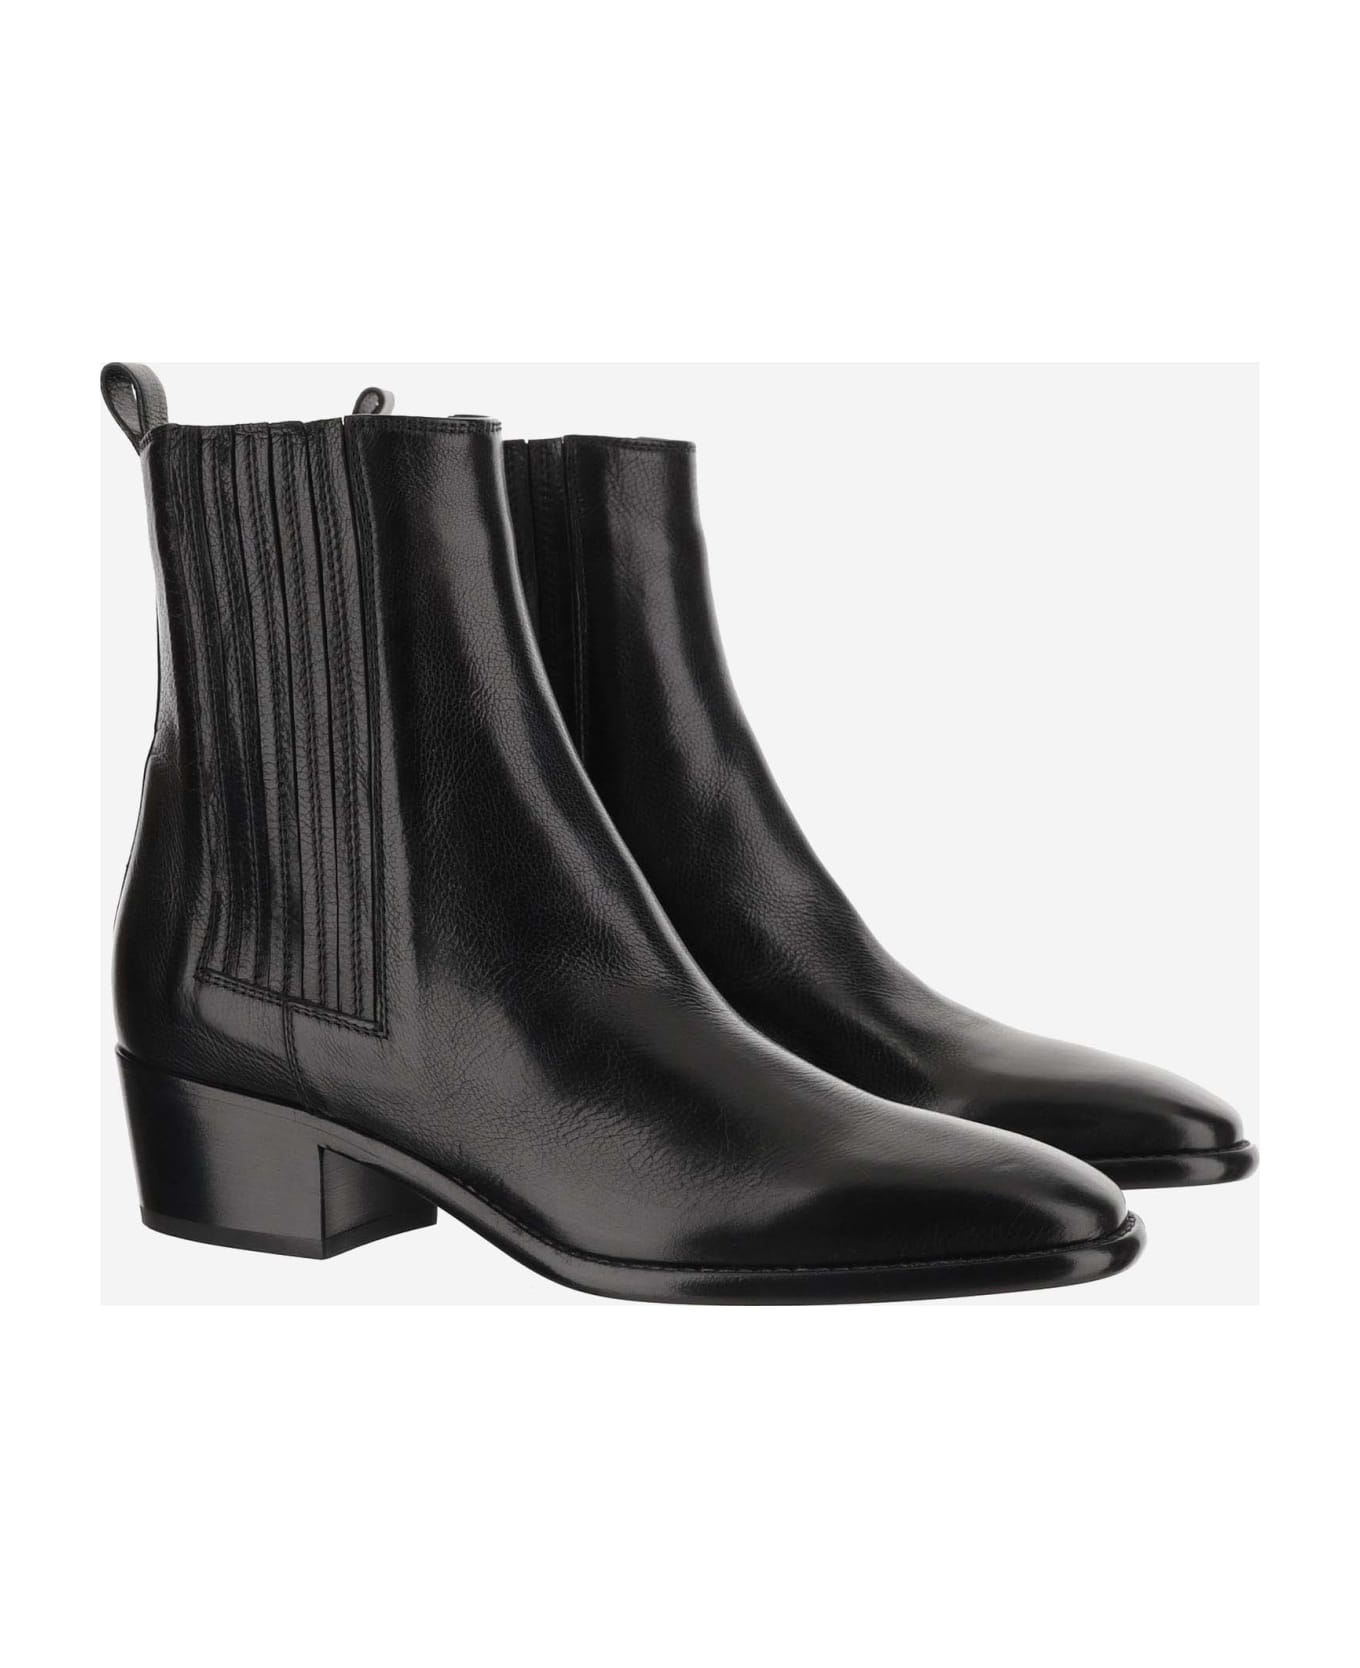 Sartore Glossy Leather Ankle Boots - Black ブーツ